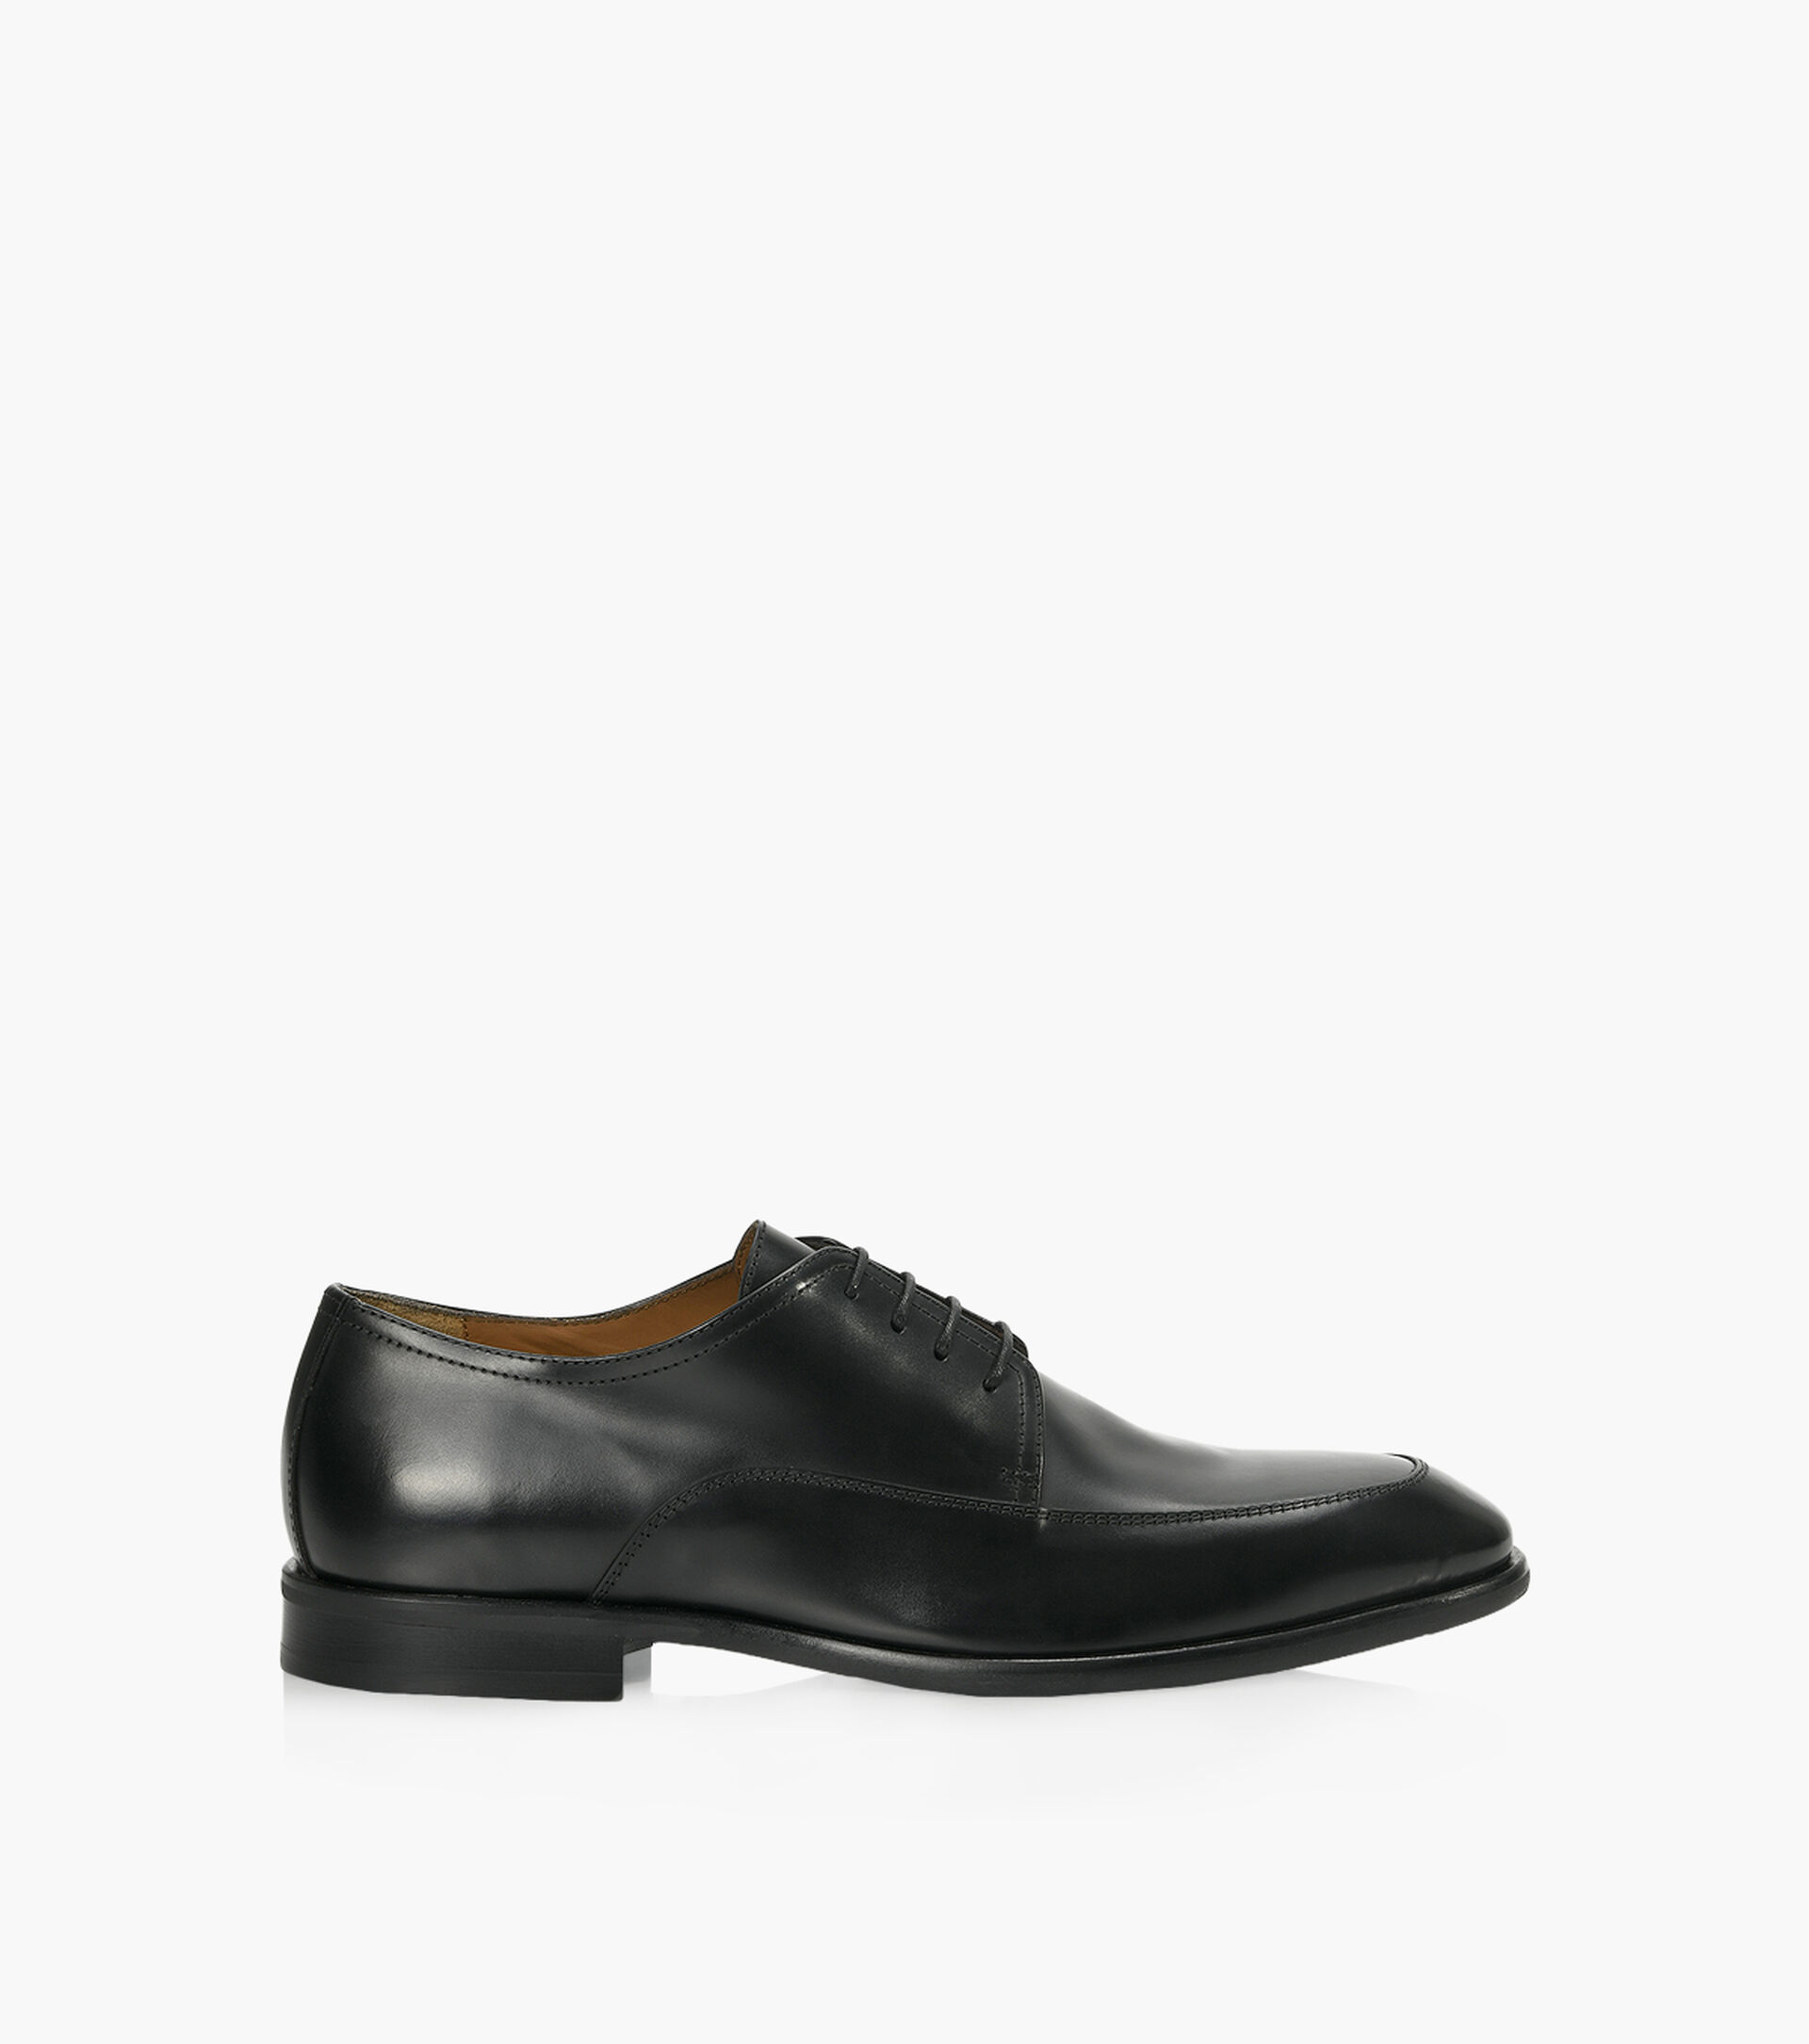 LUCA DEL FORTE JACOPO - Black Leather | Browns Shoes